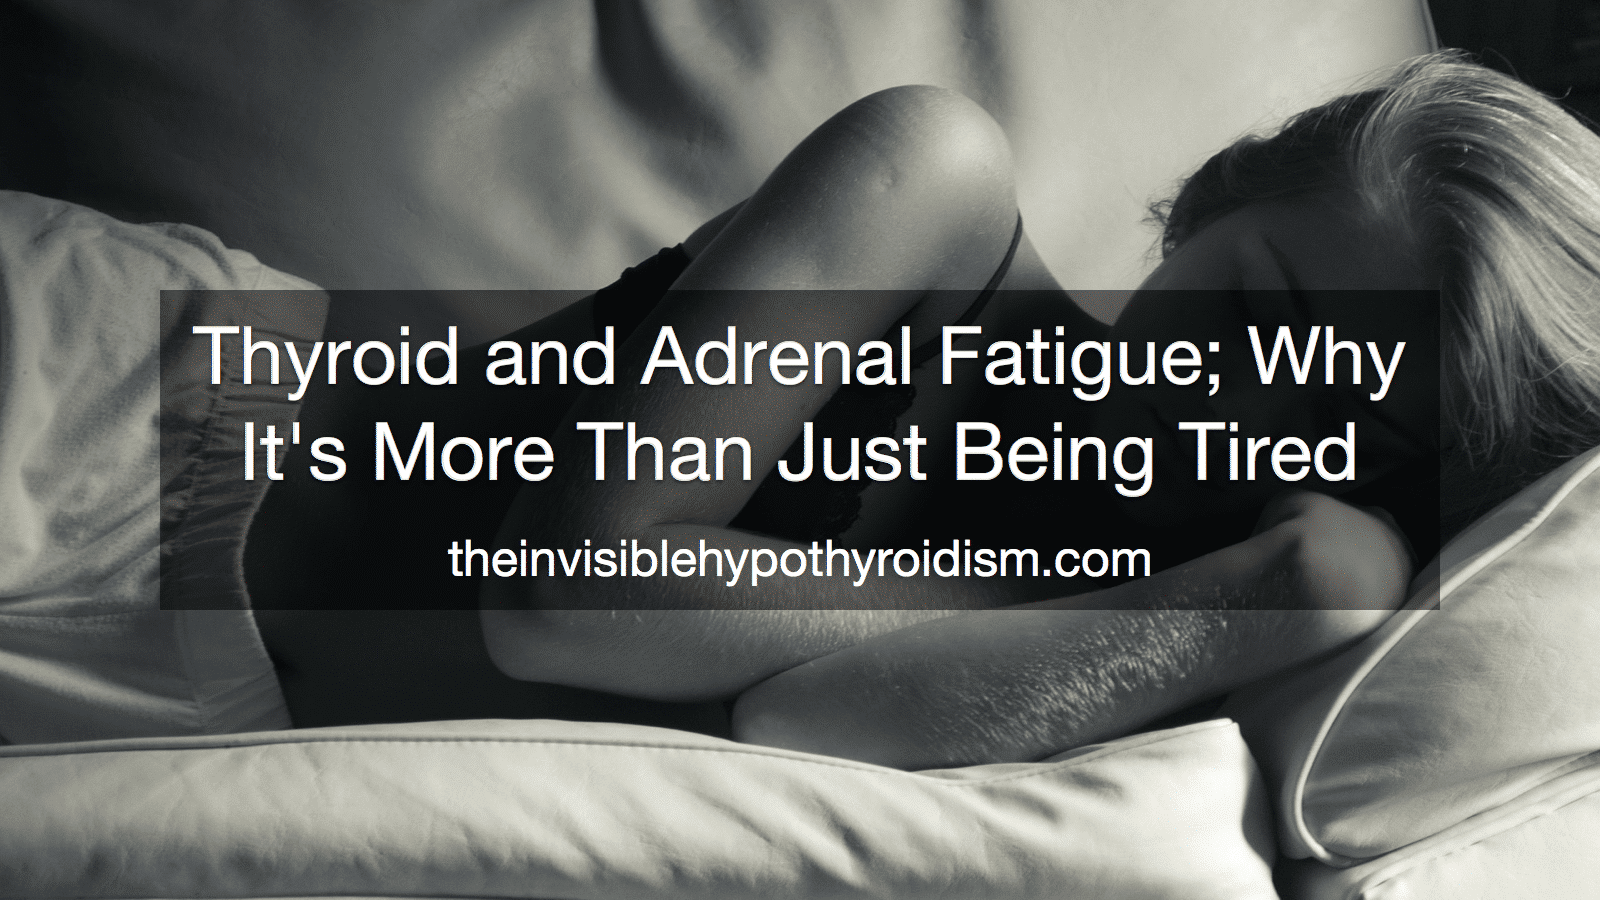 Thyroid and Adrenal Fatigue; Why It's More Than 'Just Being Tired'